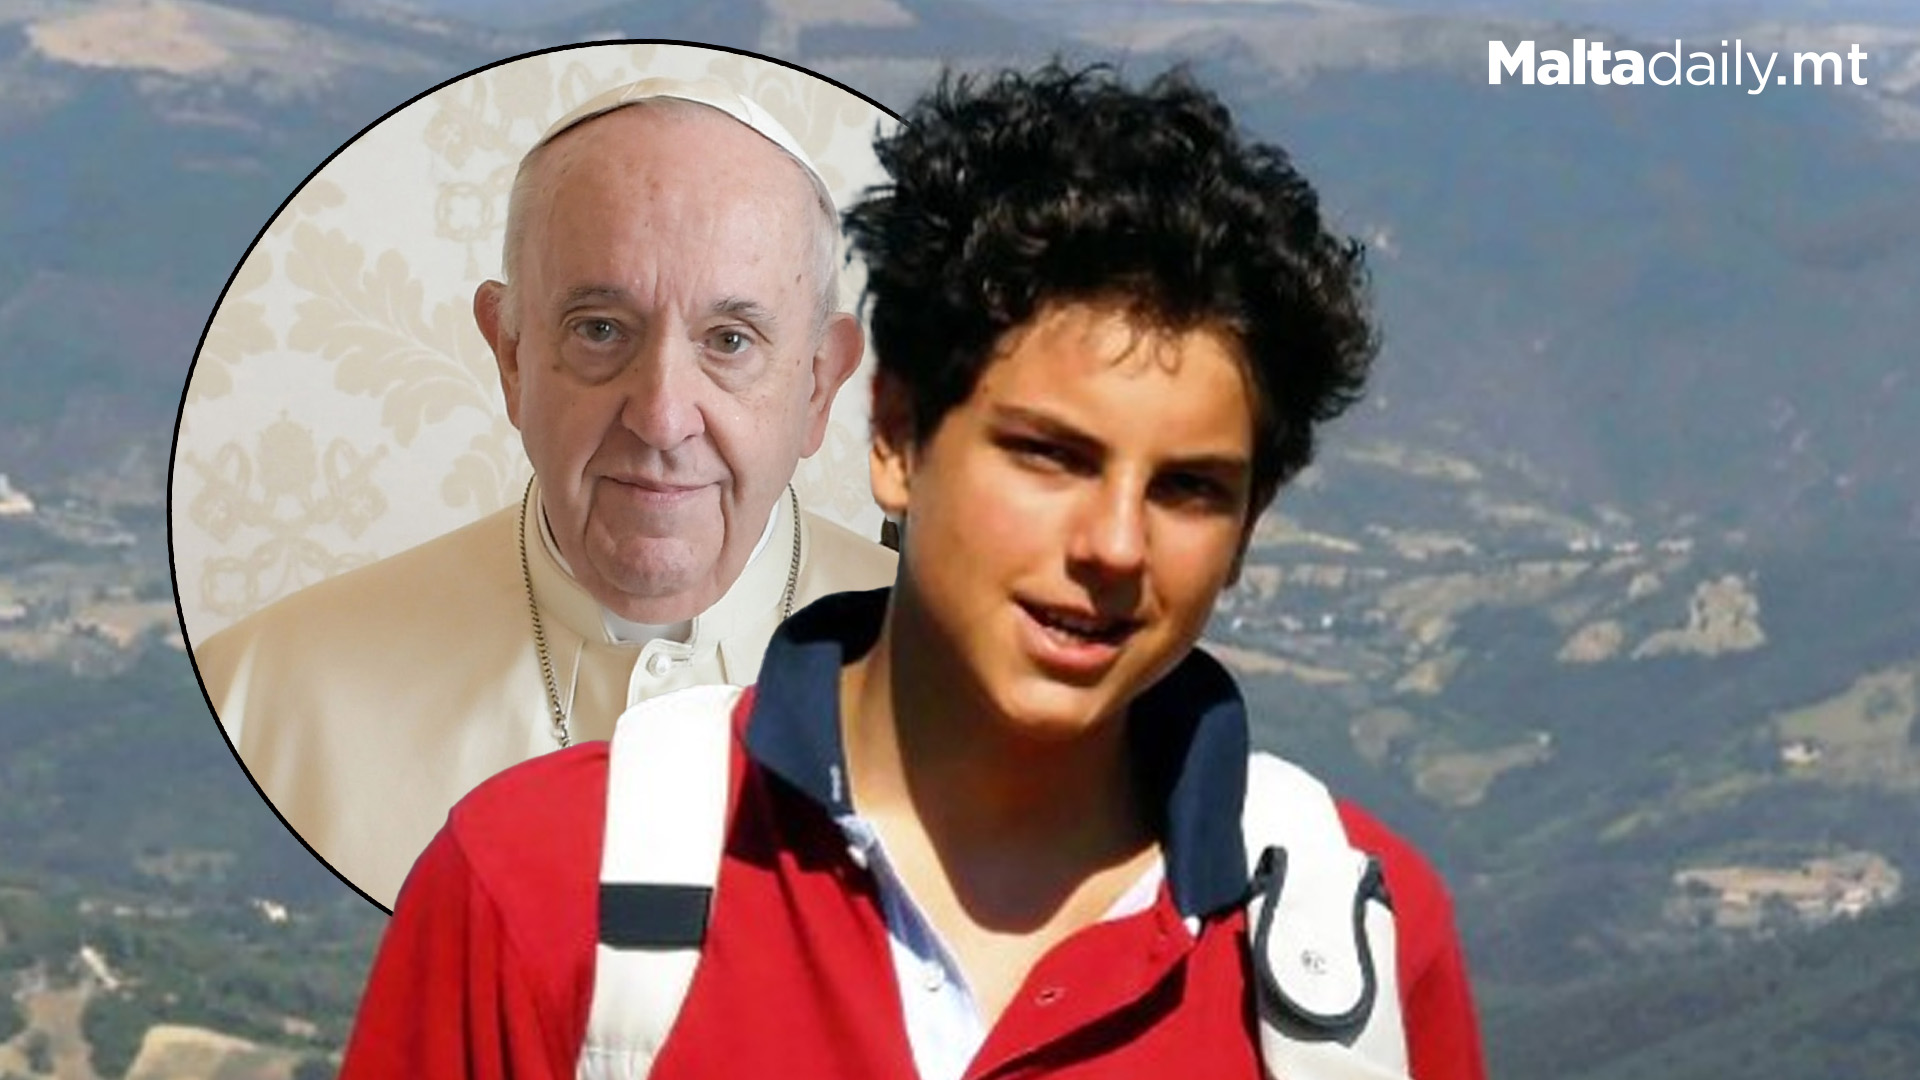 'God's Influencer': Pope Francis To Canonise 1st Millennial Saint